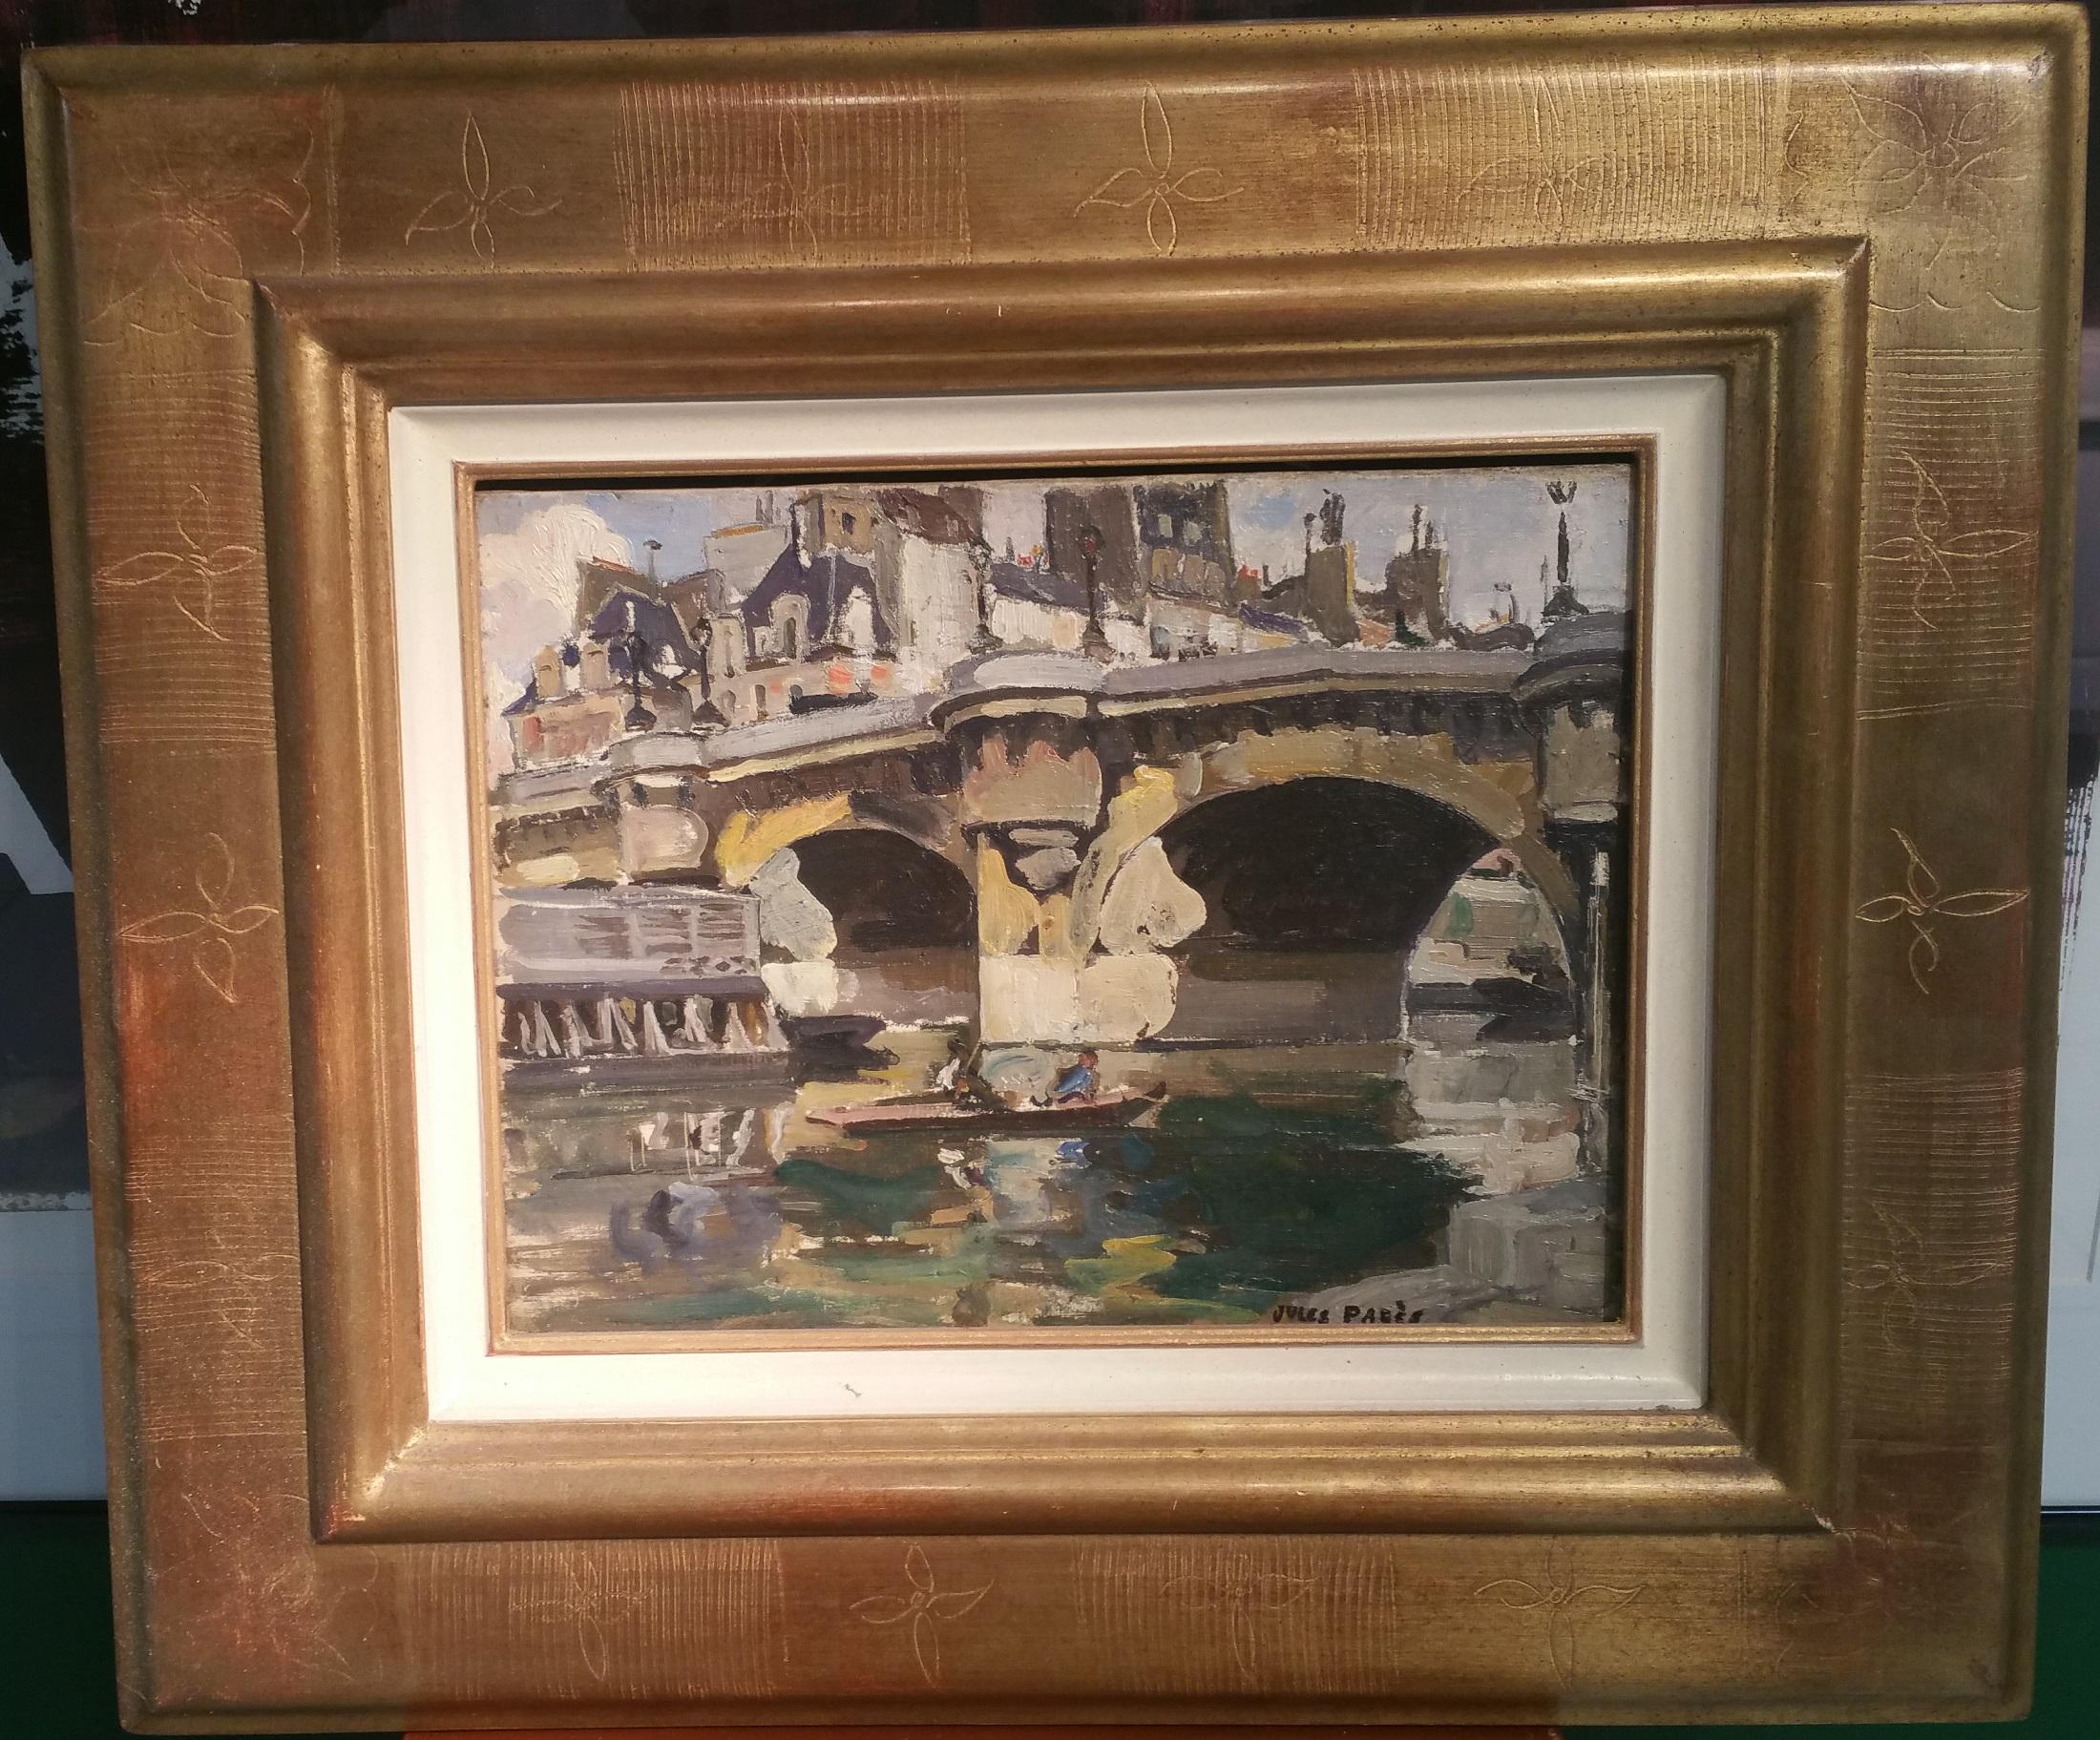 Pont Neuf, Paris - Painting by Jules Pages